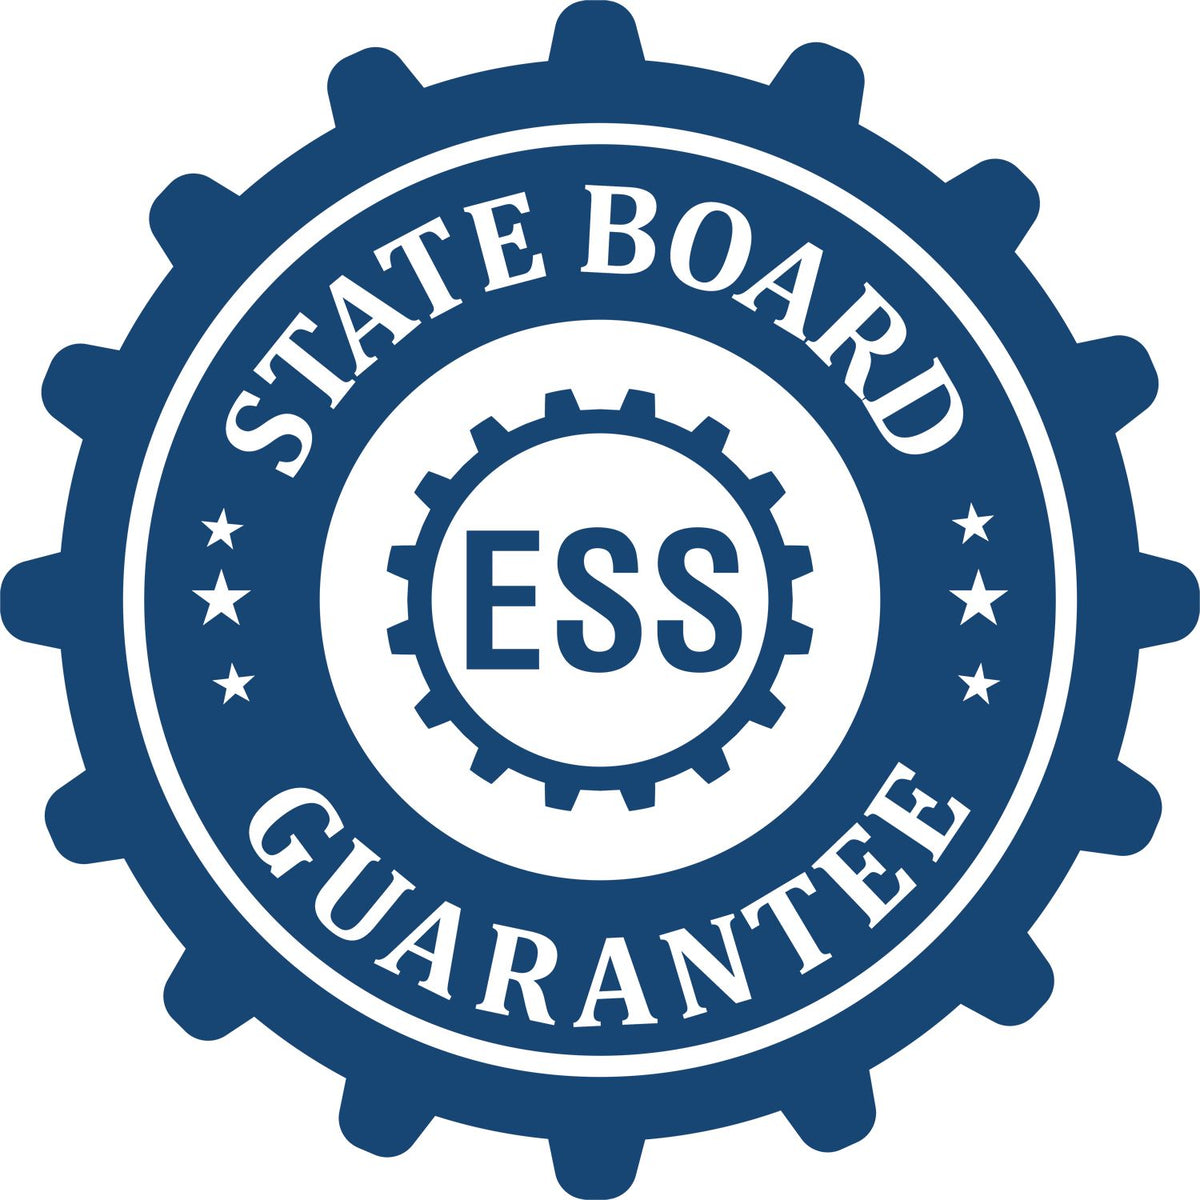 An emblem in a gear shape illustrating a state board guarantee for the Wyoming Engineer Desk Seal product.